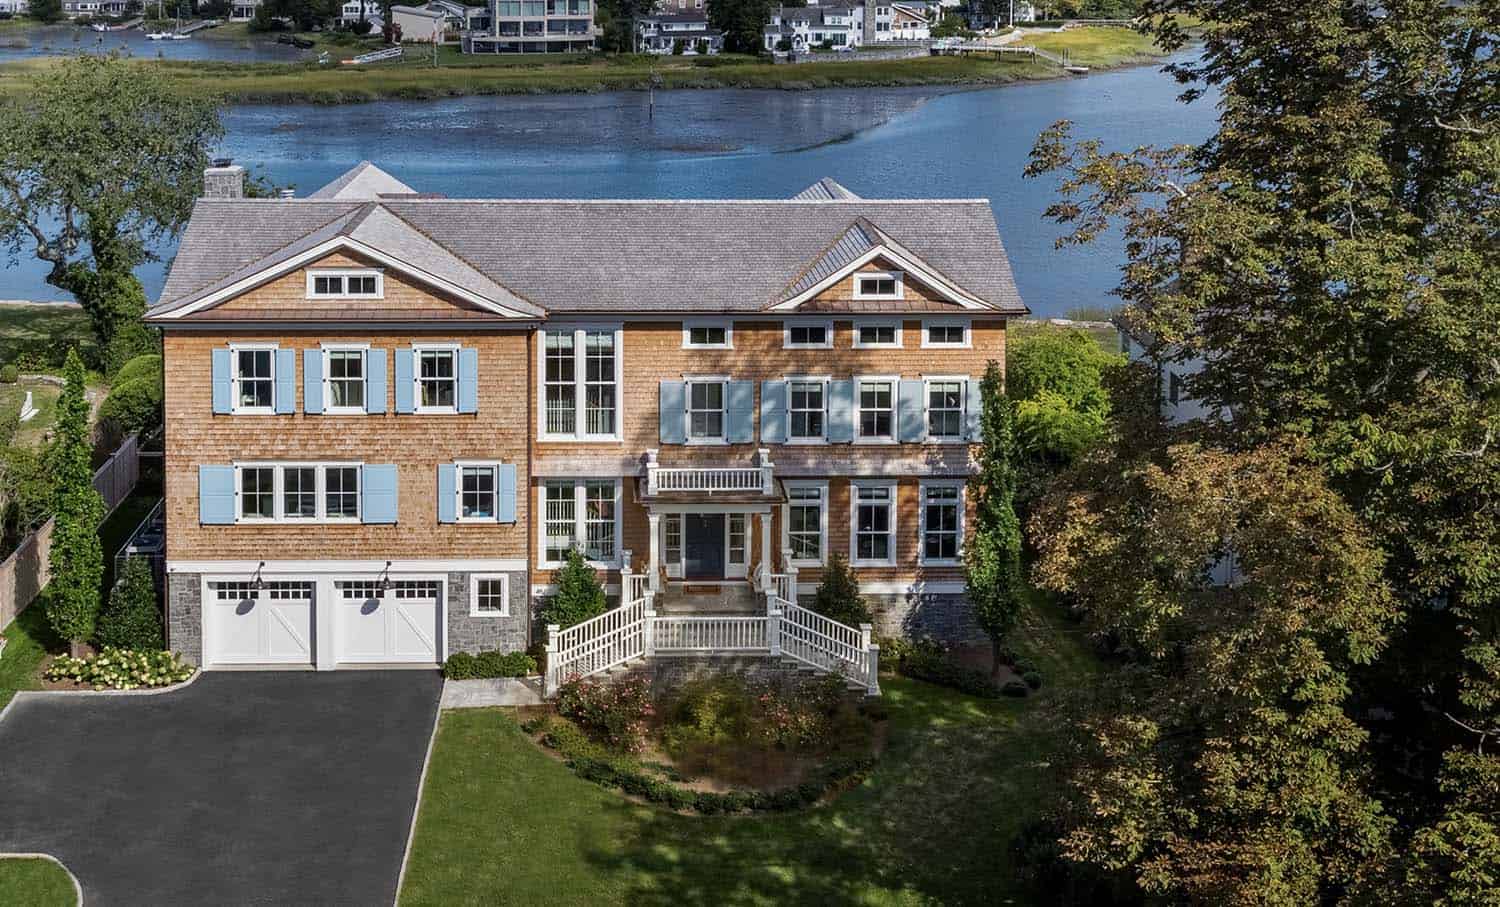 waterfront home exterior aerial view